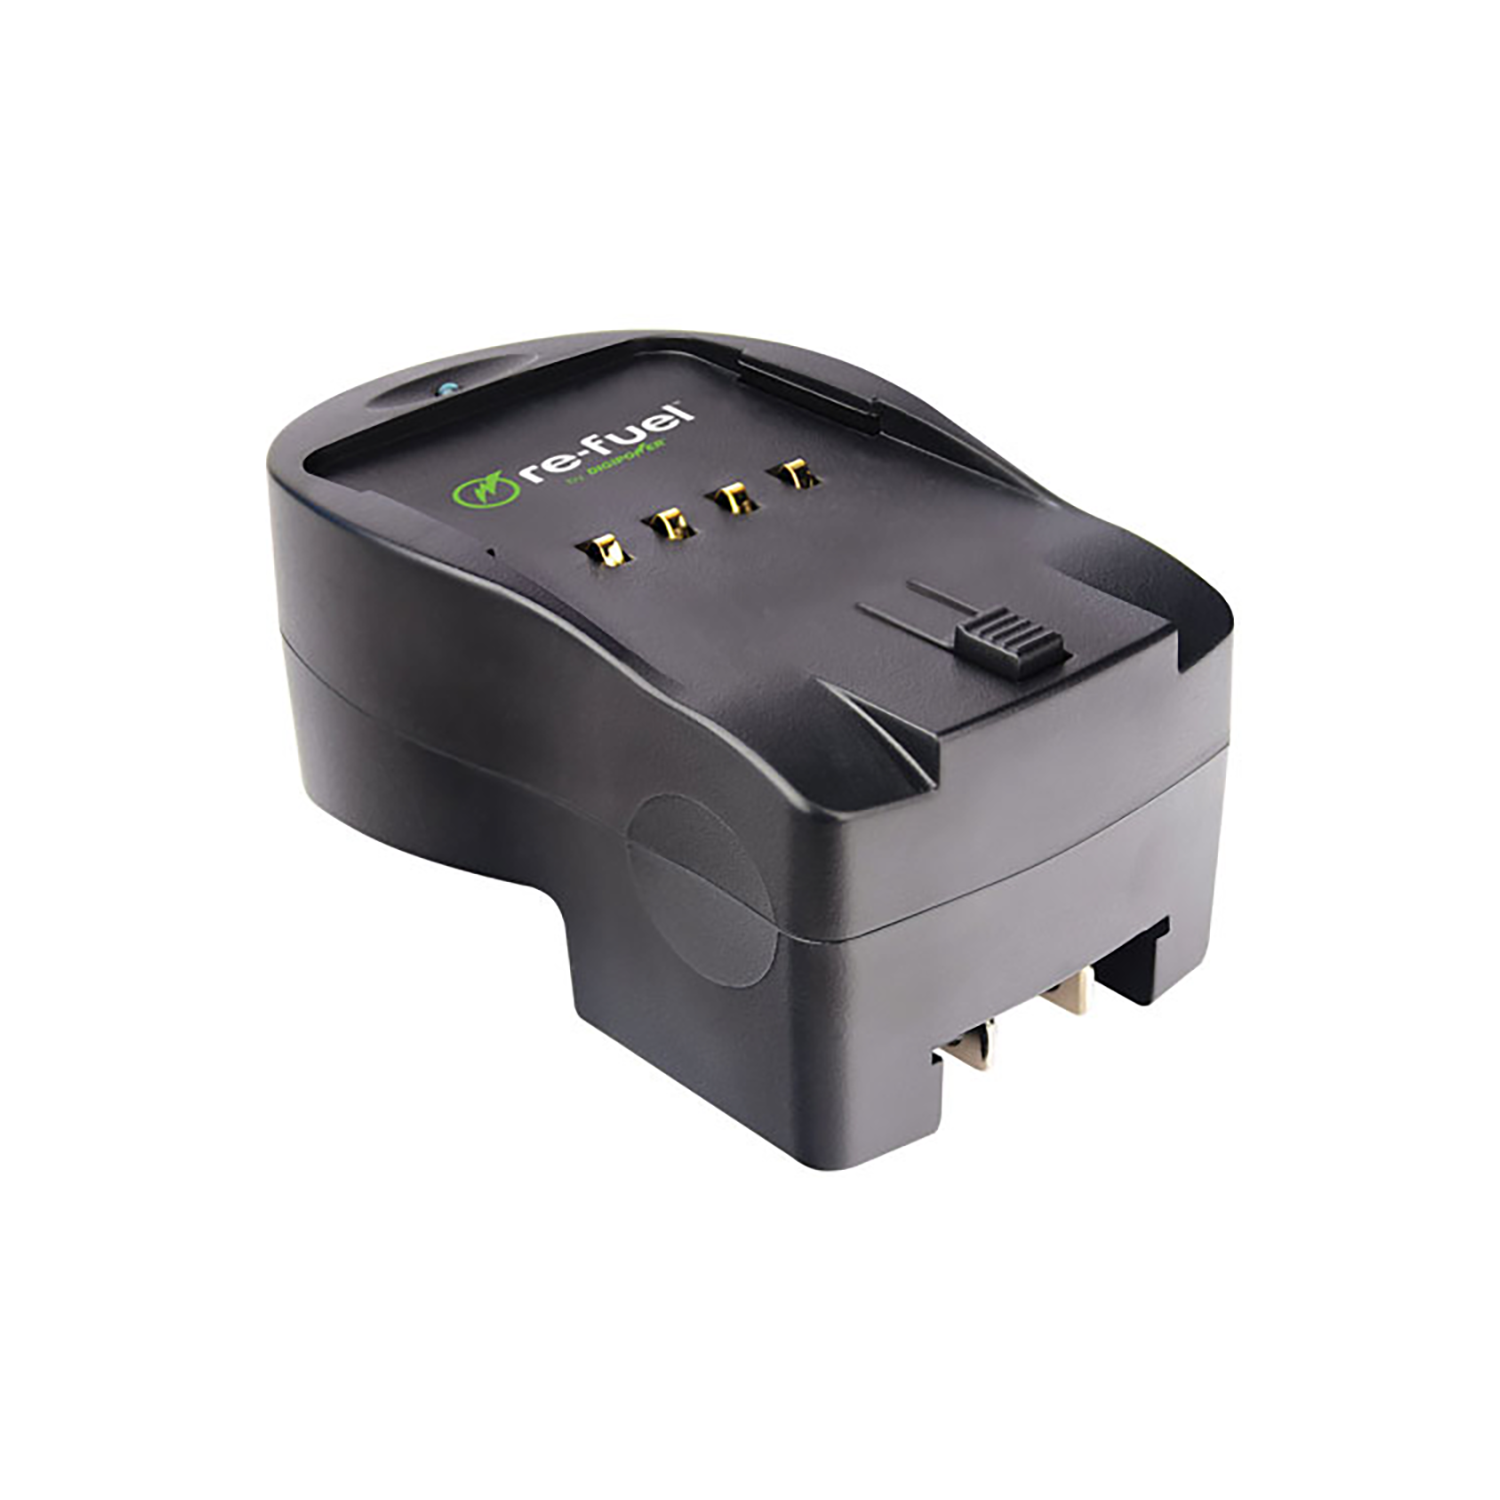 Re-Fuel Lithium-Ion Battery Charger for Nikon Digital Camera Batteries